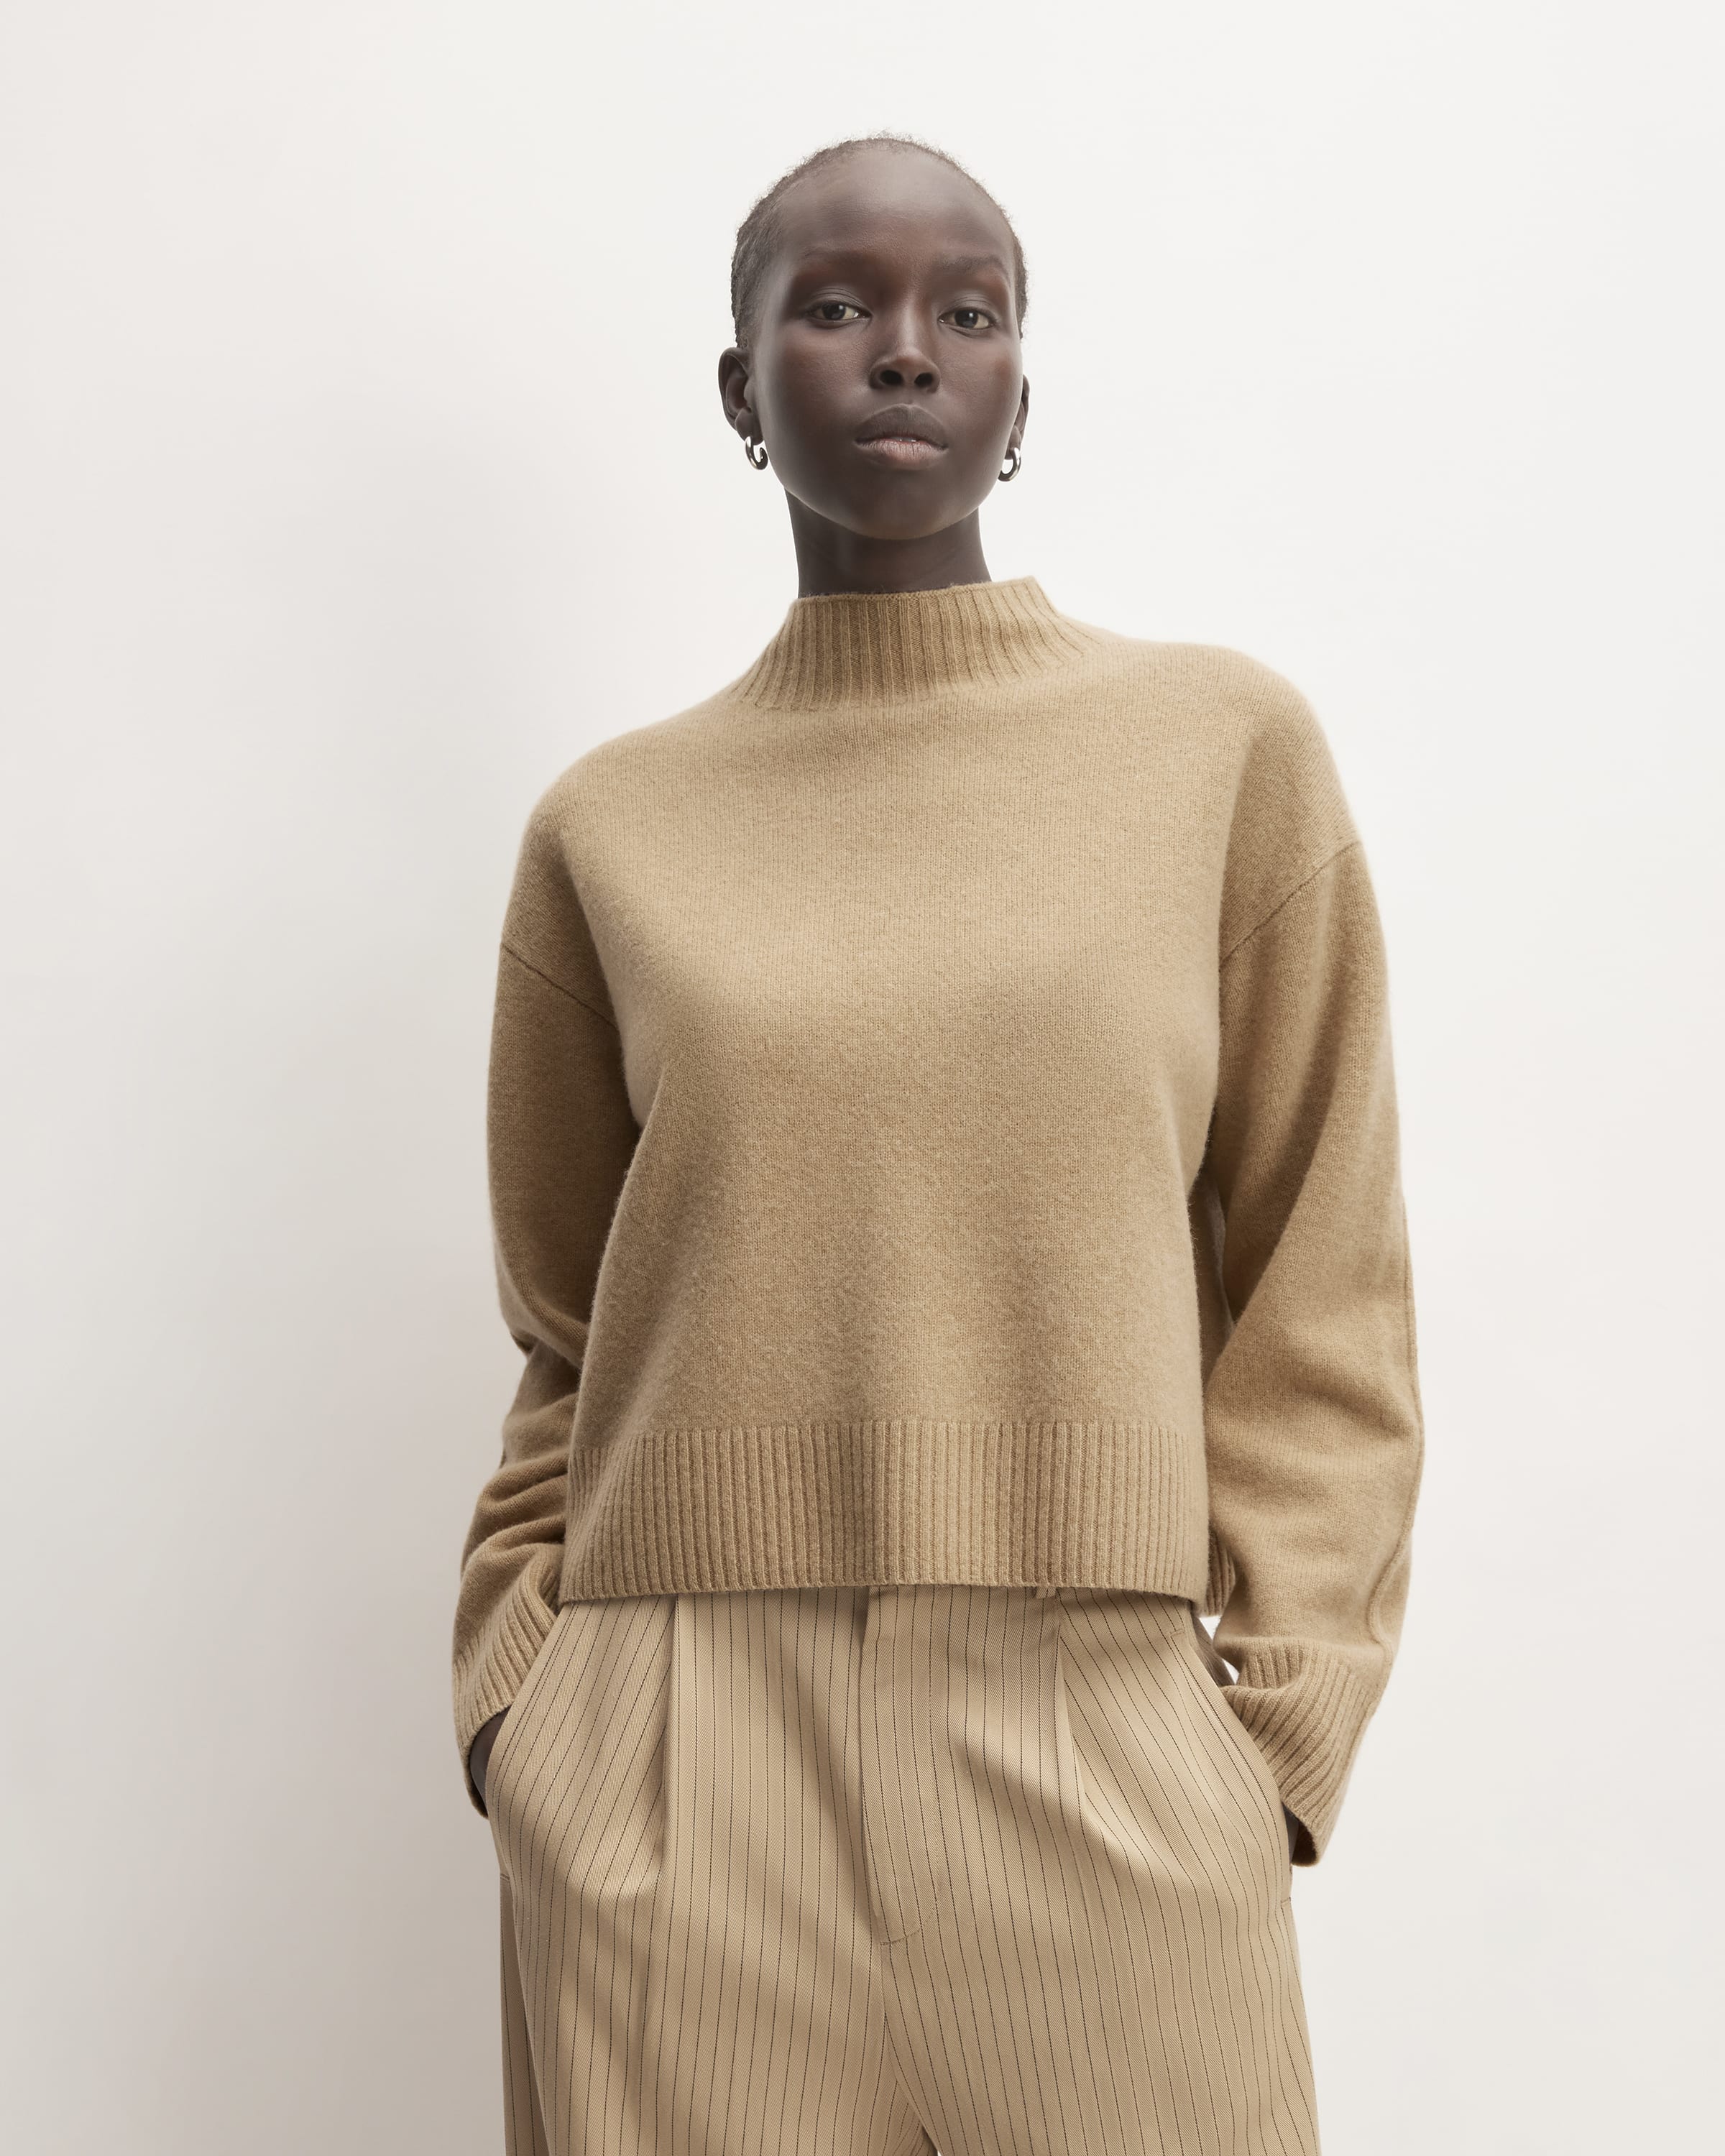 Test Knitters Needed* Making a Seamless Mock Neck Style Sweater 